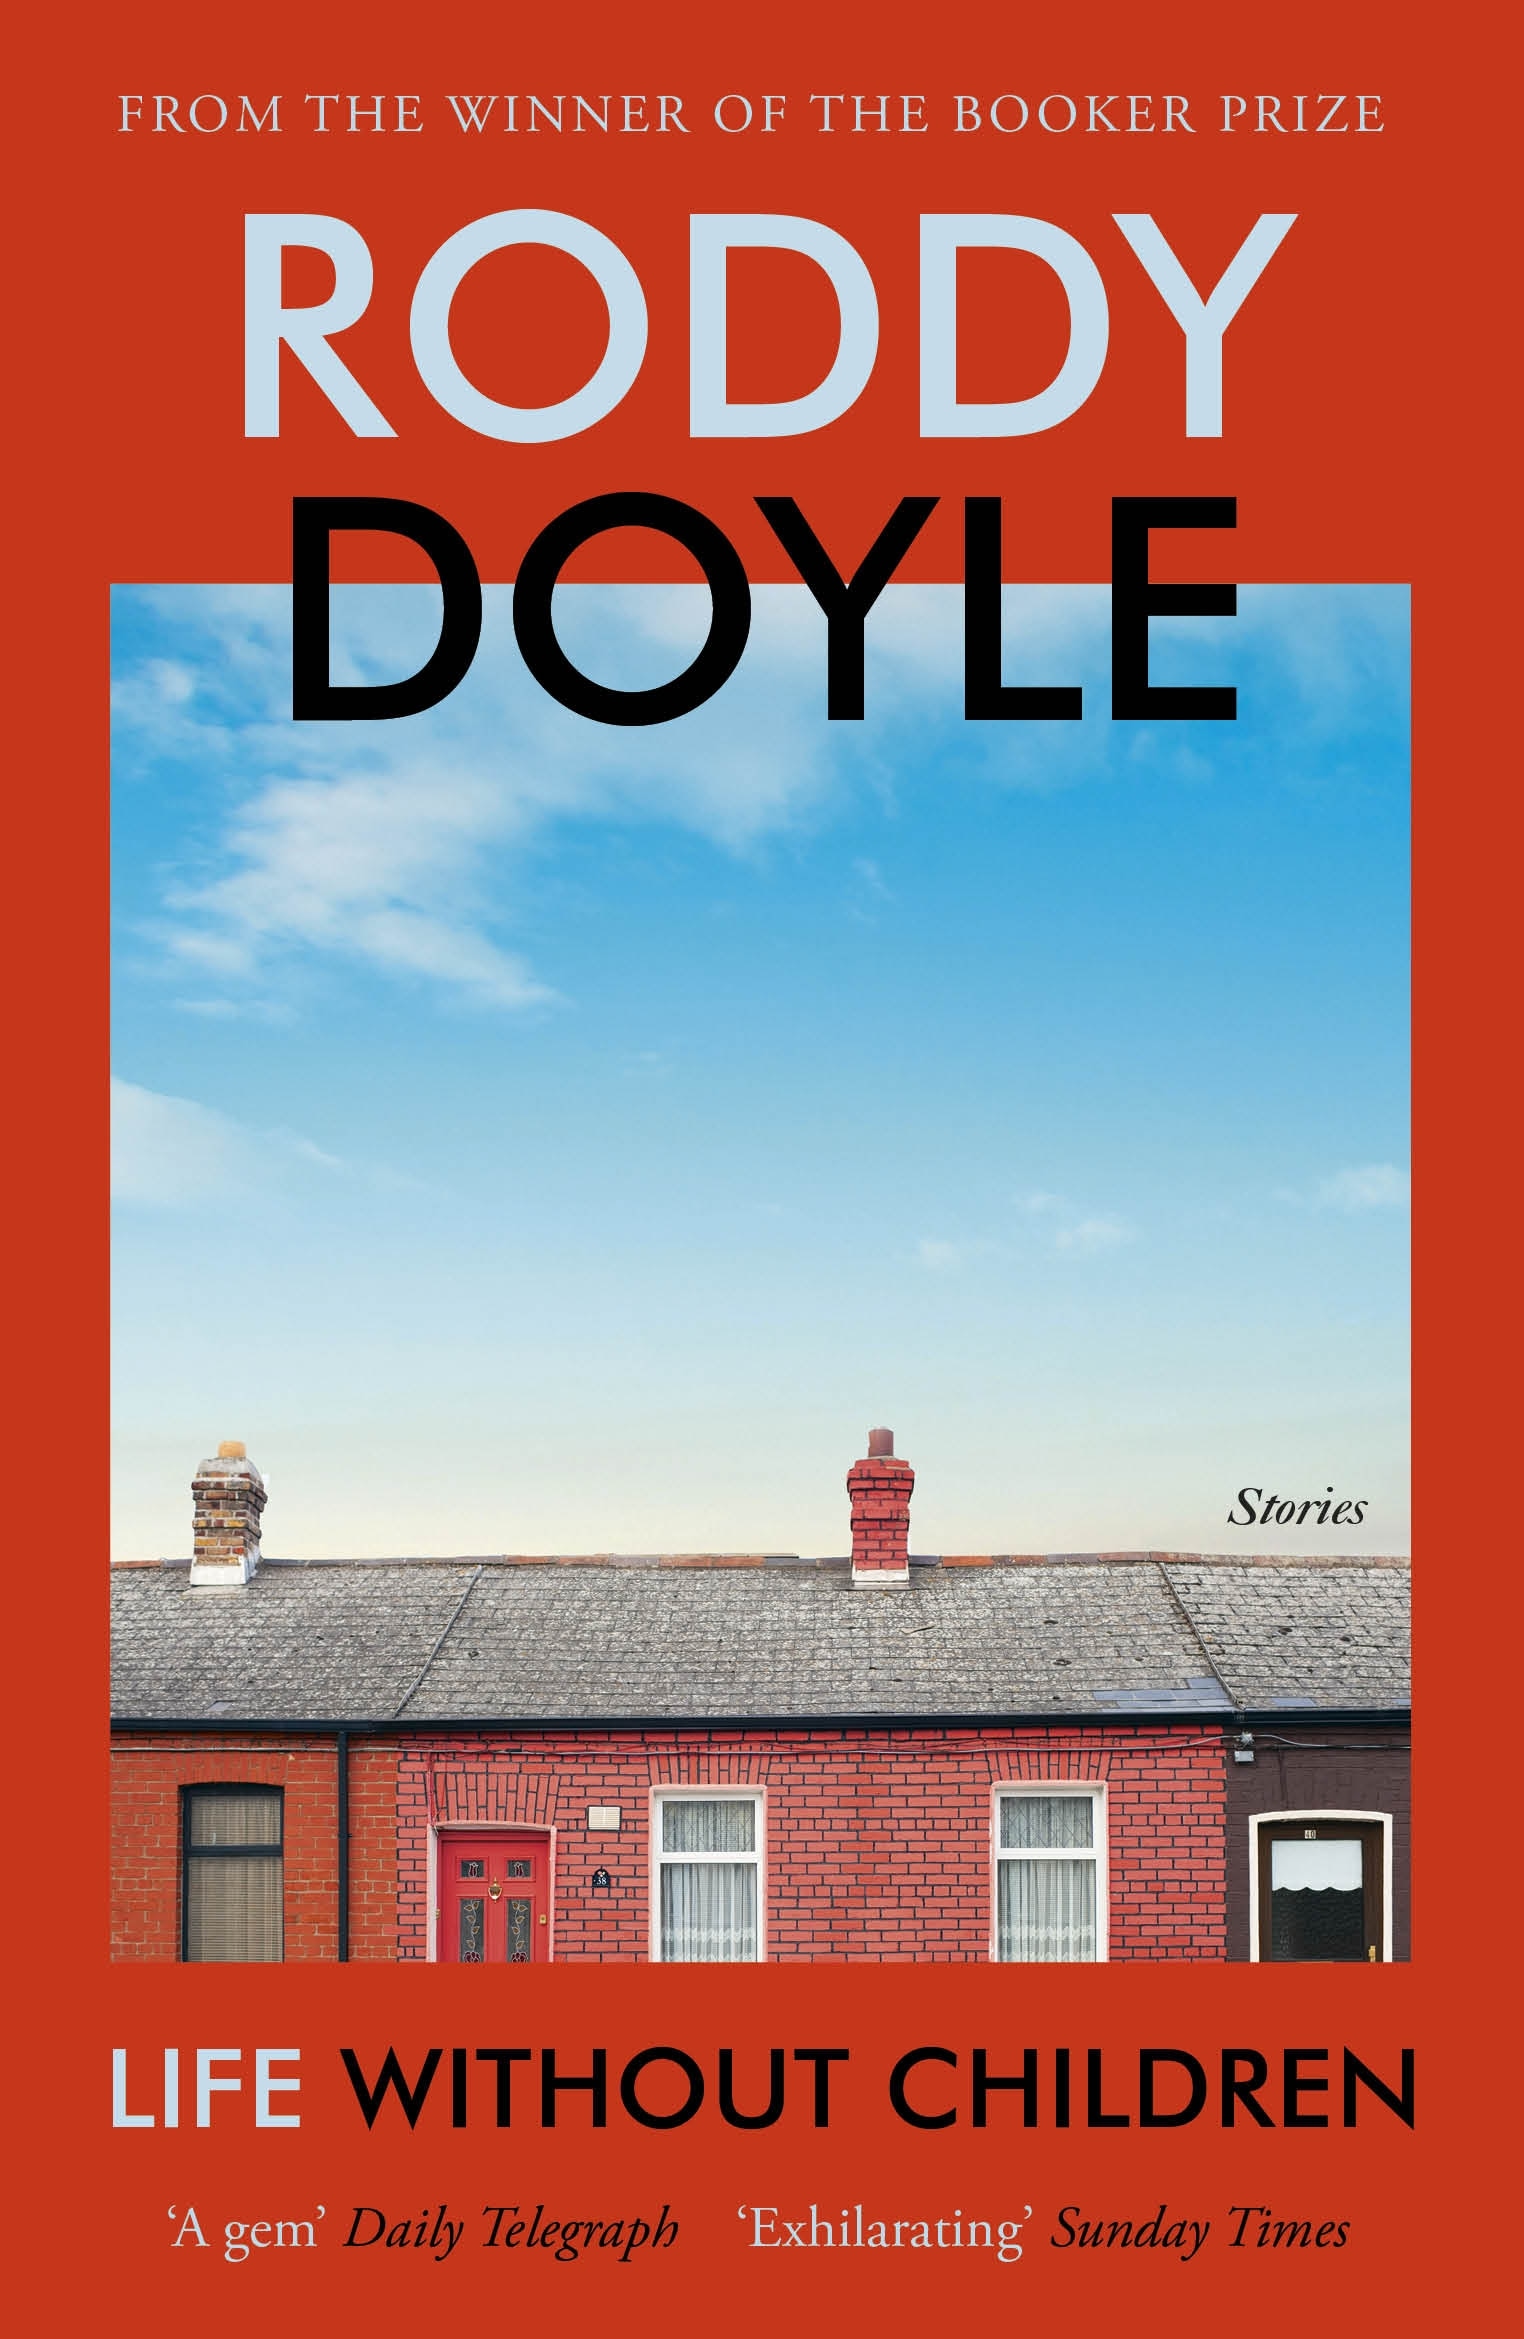 Book “Life Without Children” by Roddy Doyle — October 6, 2022